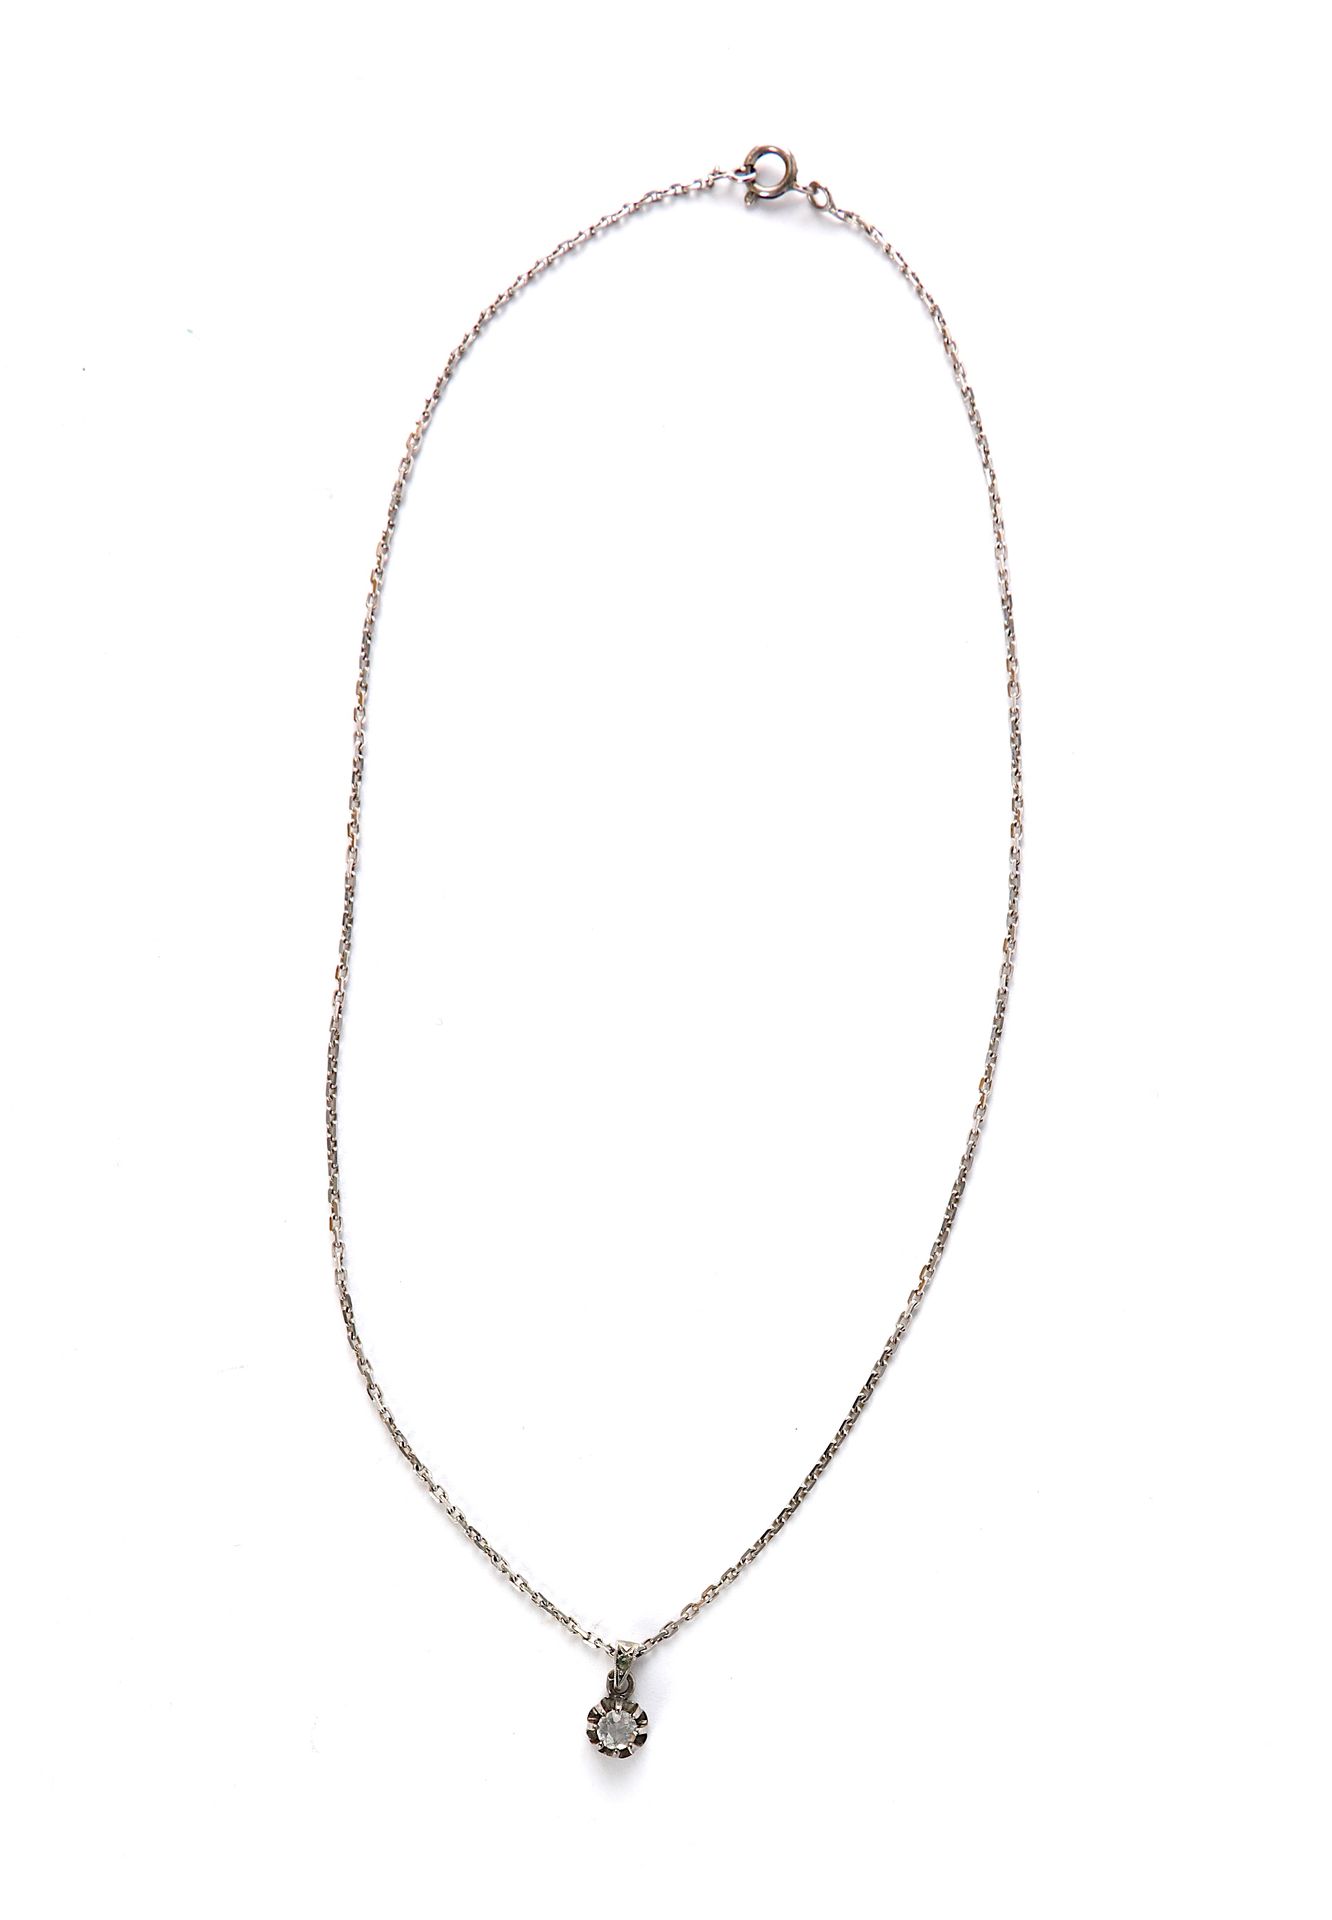 Null white metal necklace with a brilliant. Weight: 3 g.